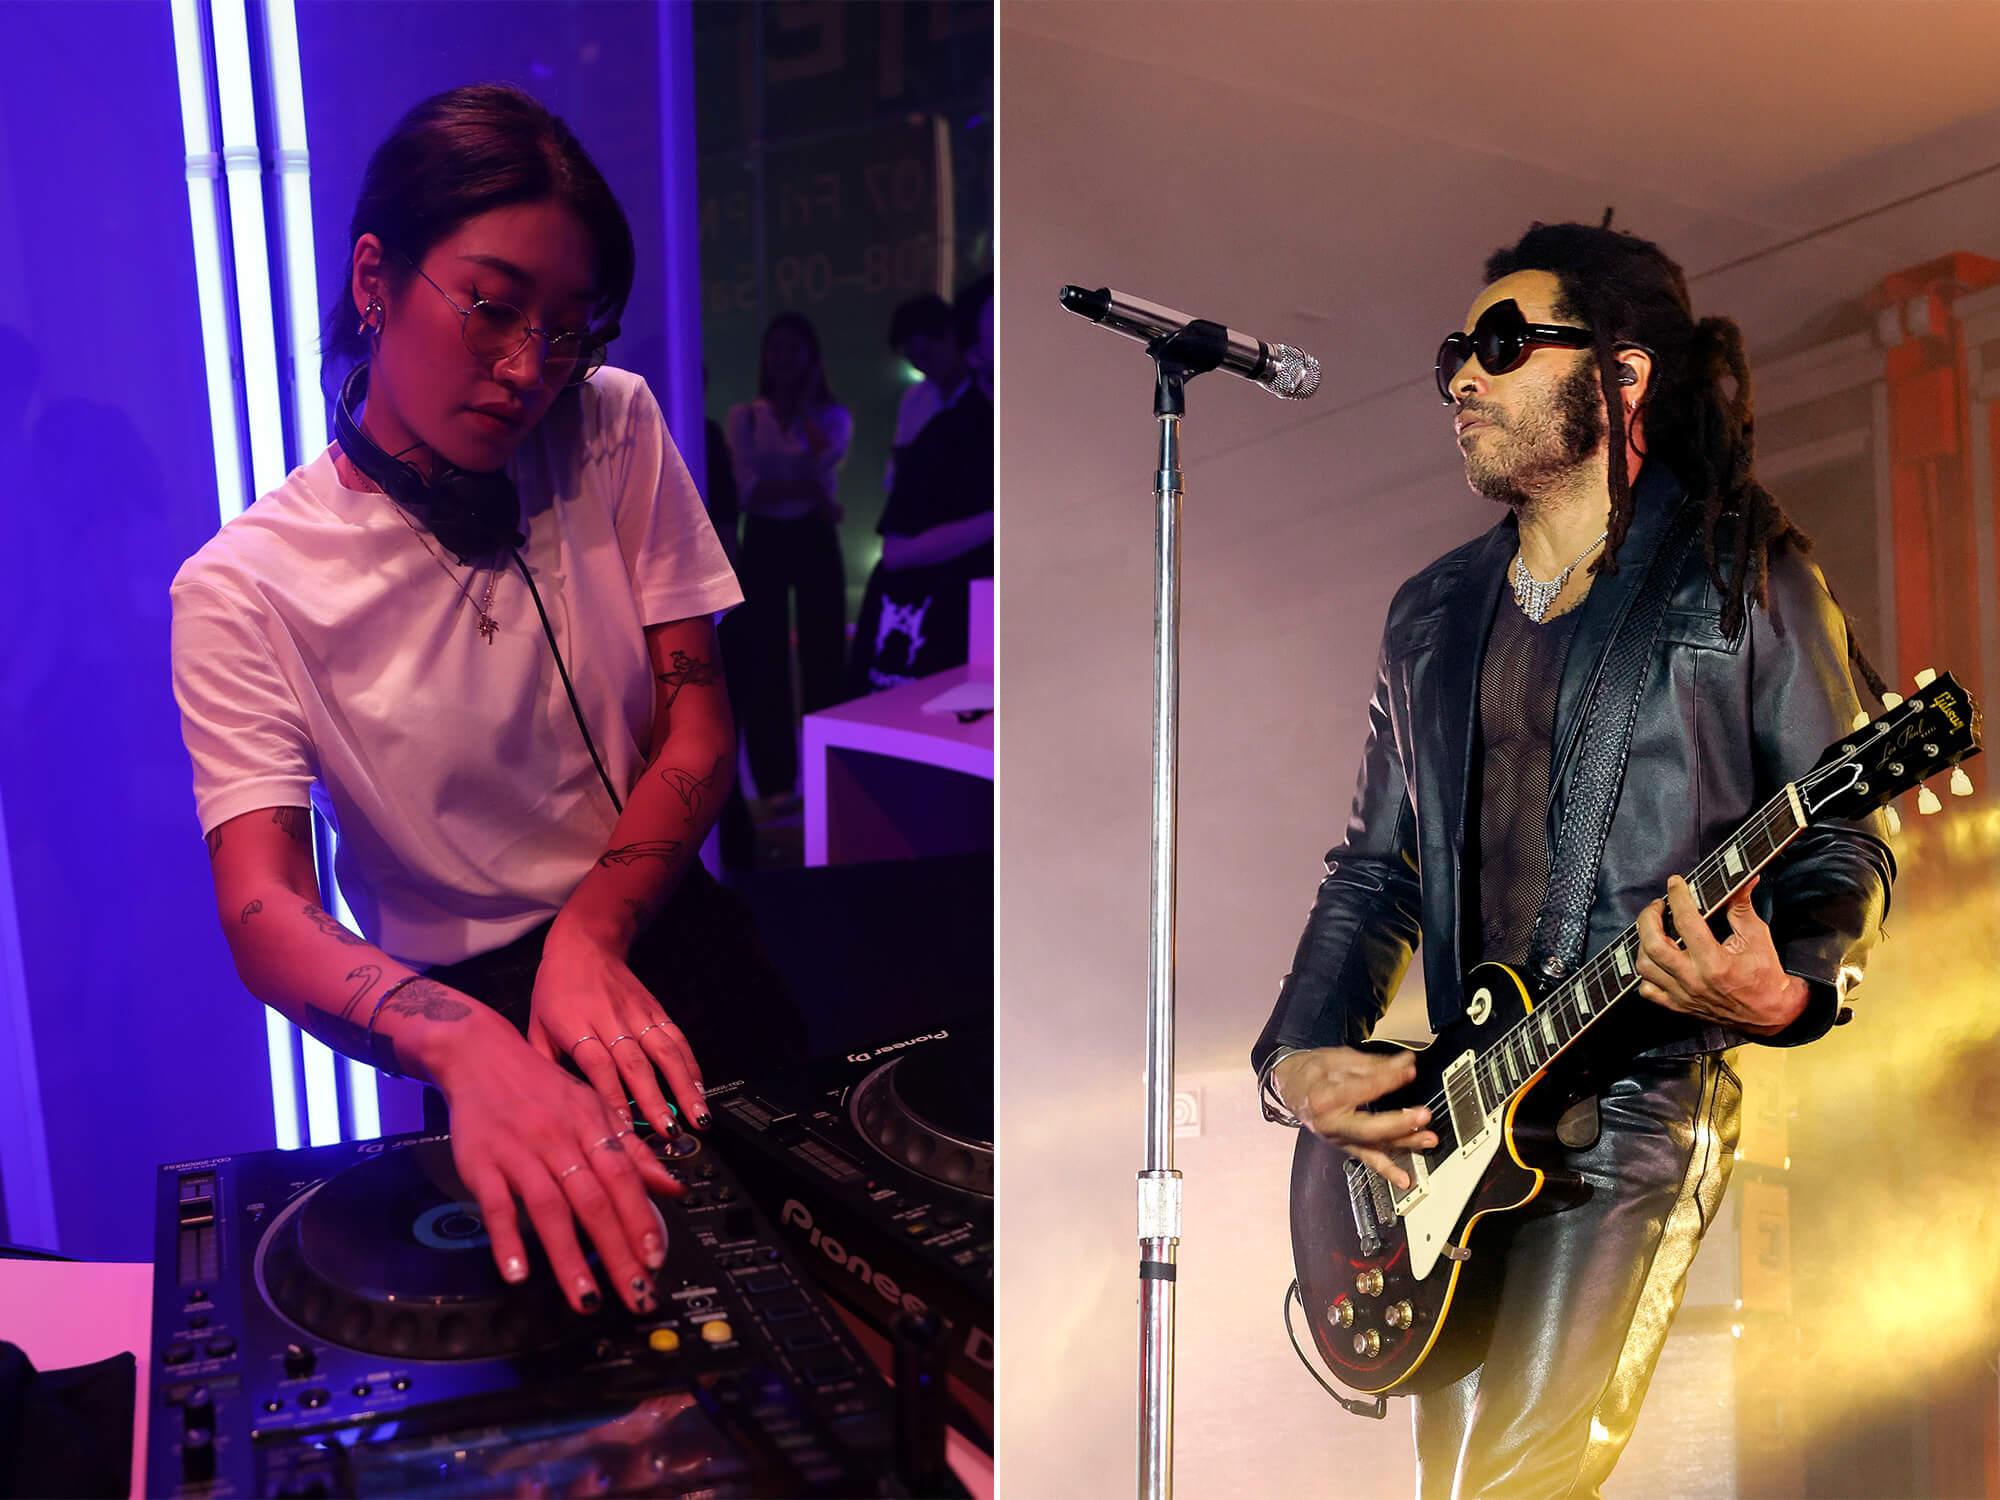 Peggy Gou (left) Dj-ing. She wears headphones on her neck and has her hand on the turntable. Lenny Kravitz (right) playing guitar on stage. He's wearing sunglasses and is standing in front of a microphone.